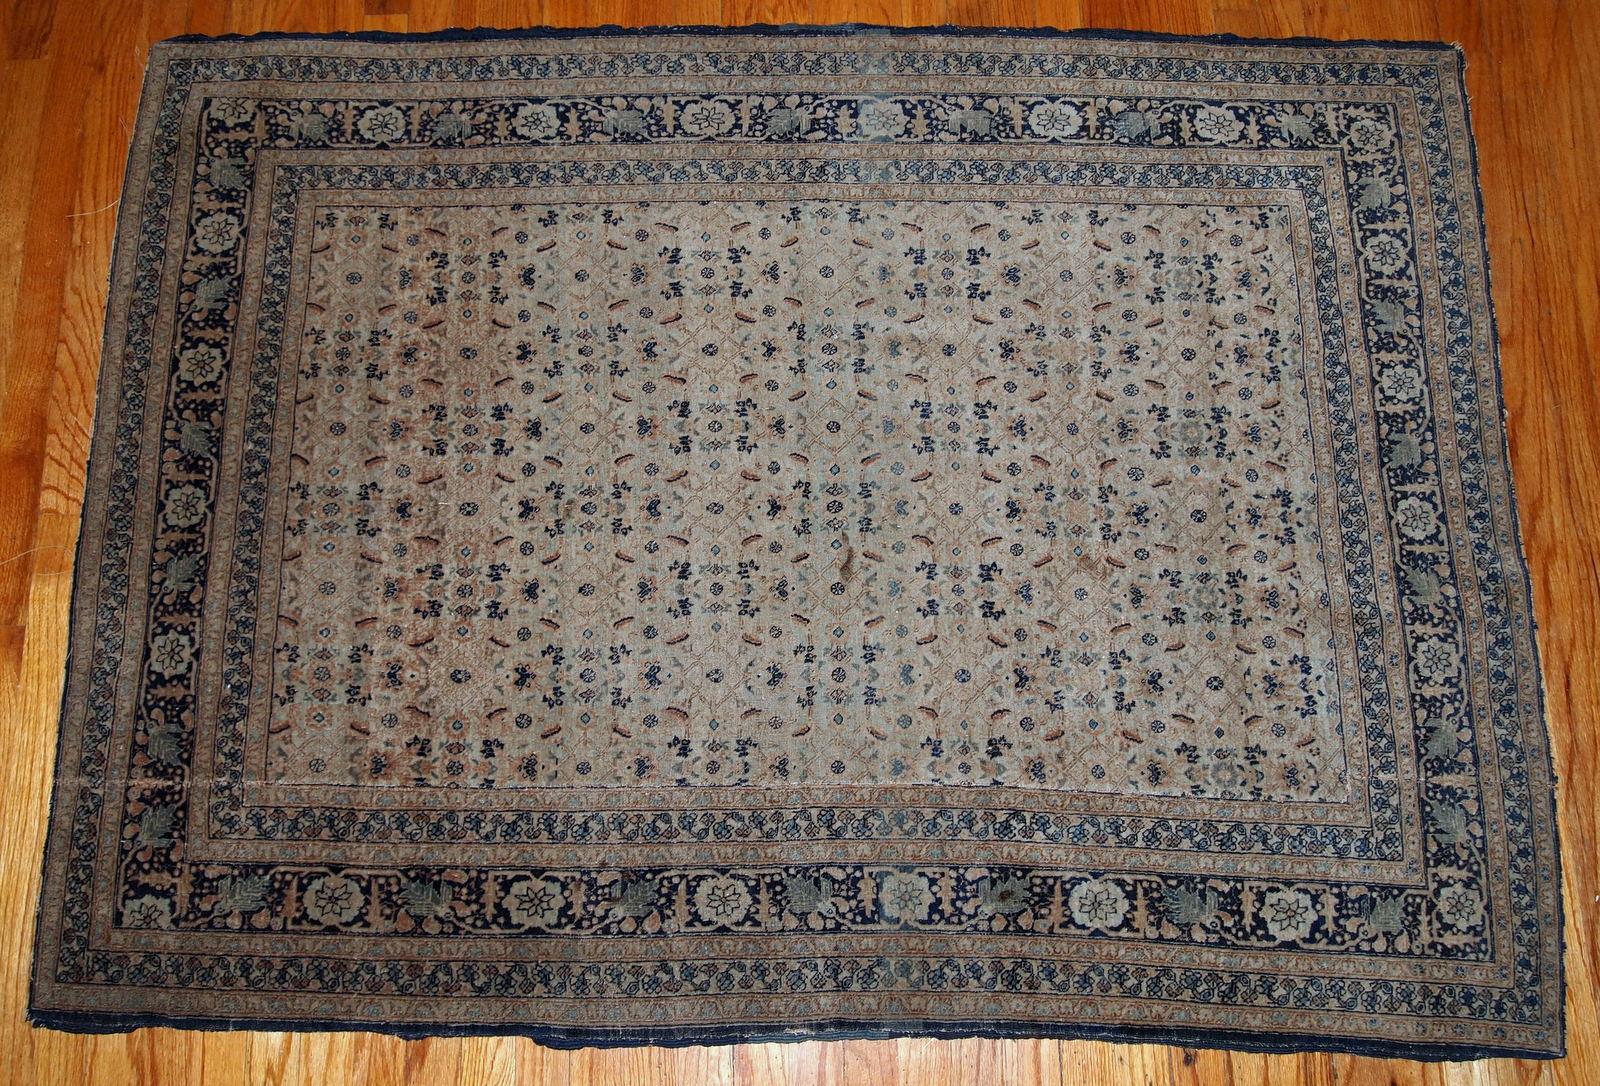 Antique tabriz hajalili rug in beige, brown and blue wool. The rug is from the end of 19th century, it has one cut.

 